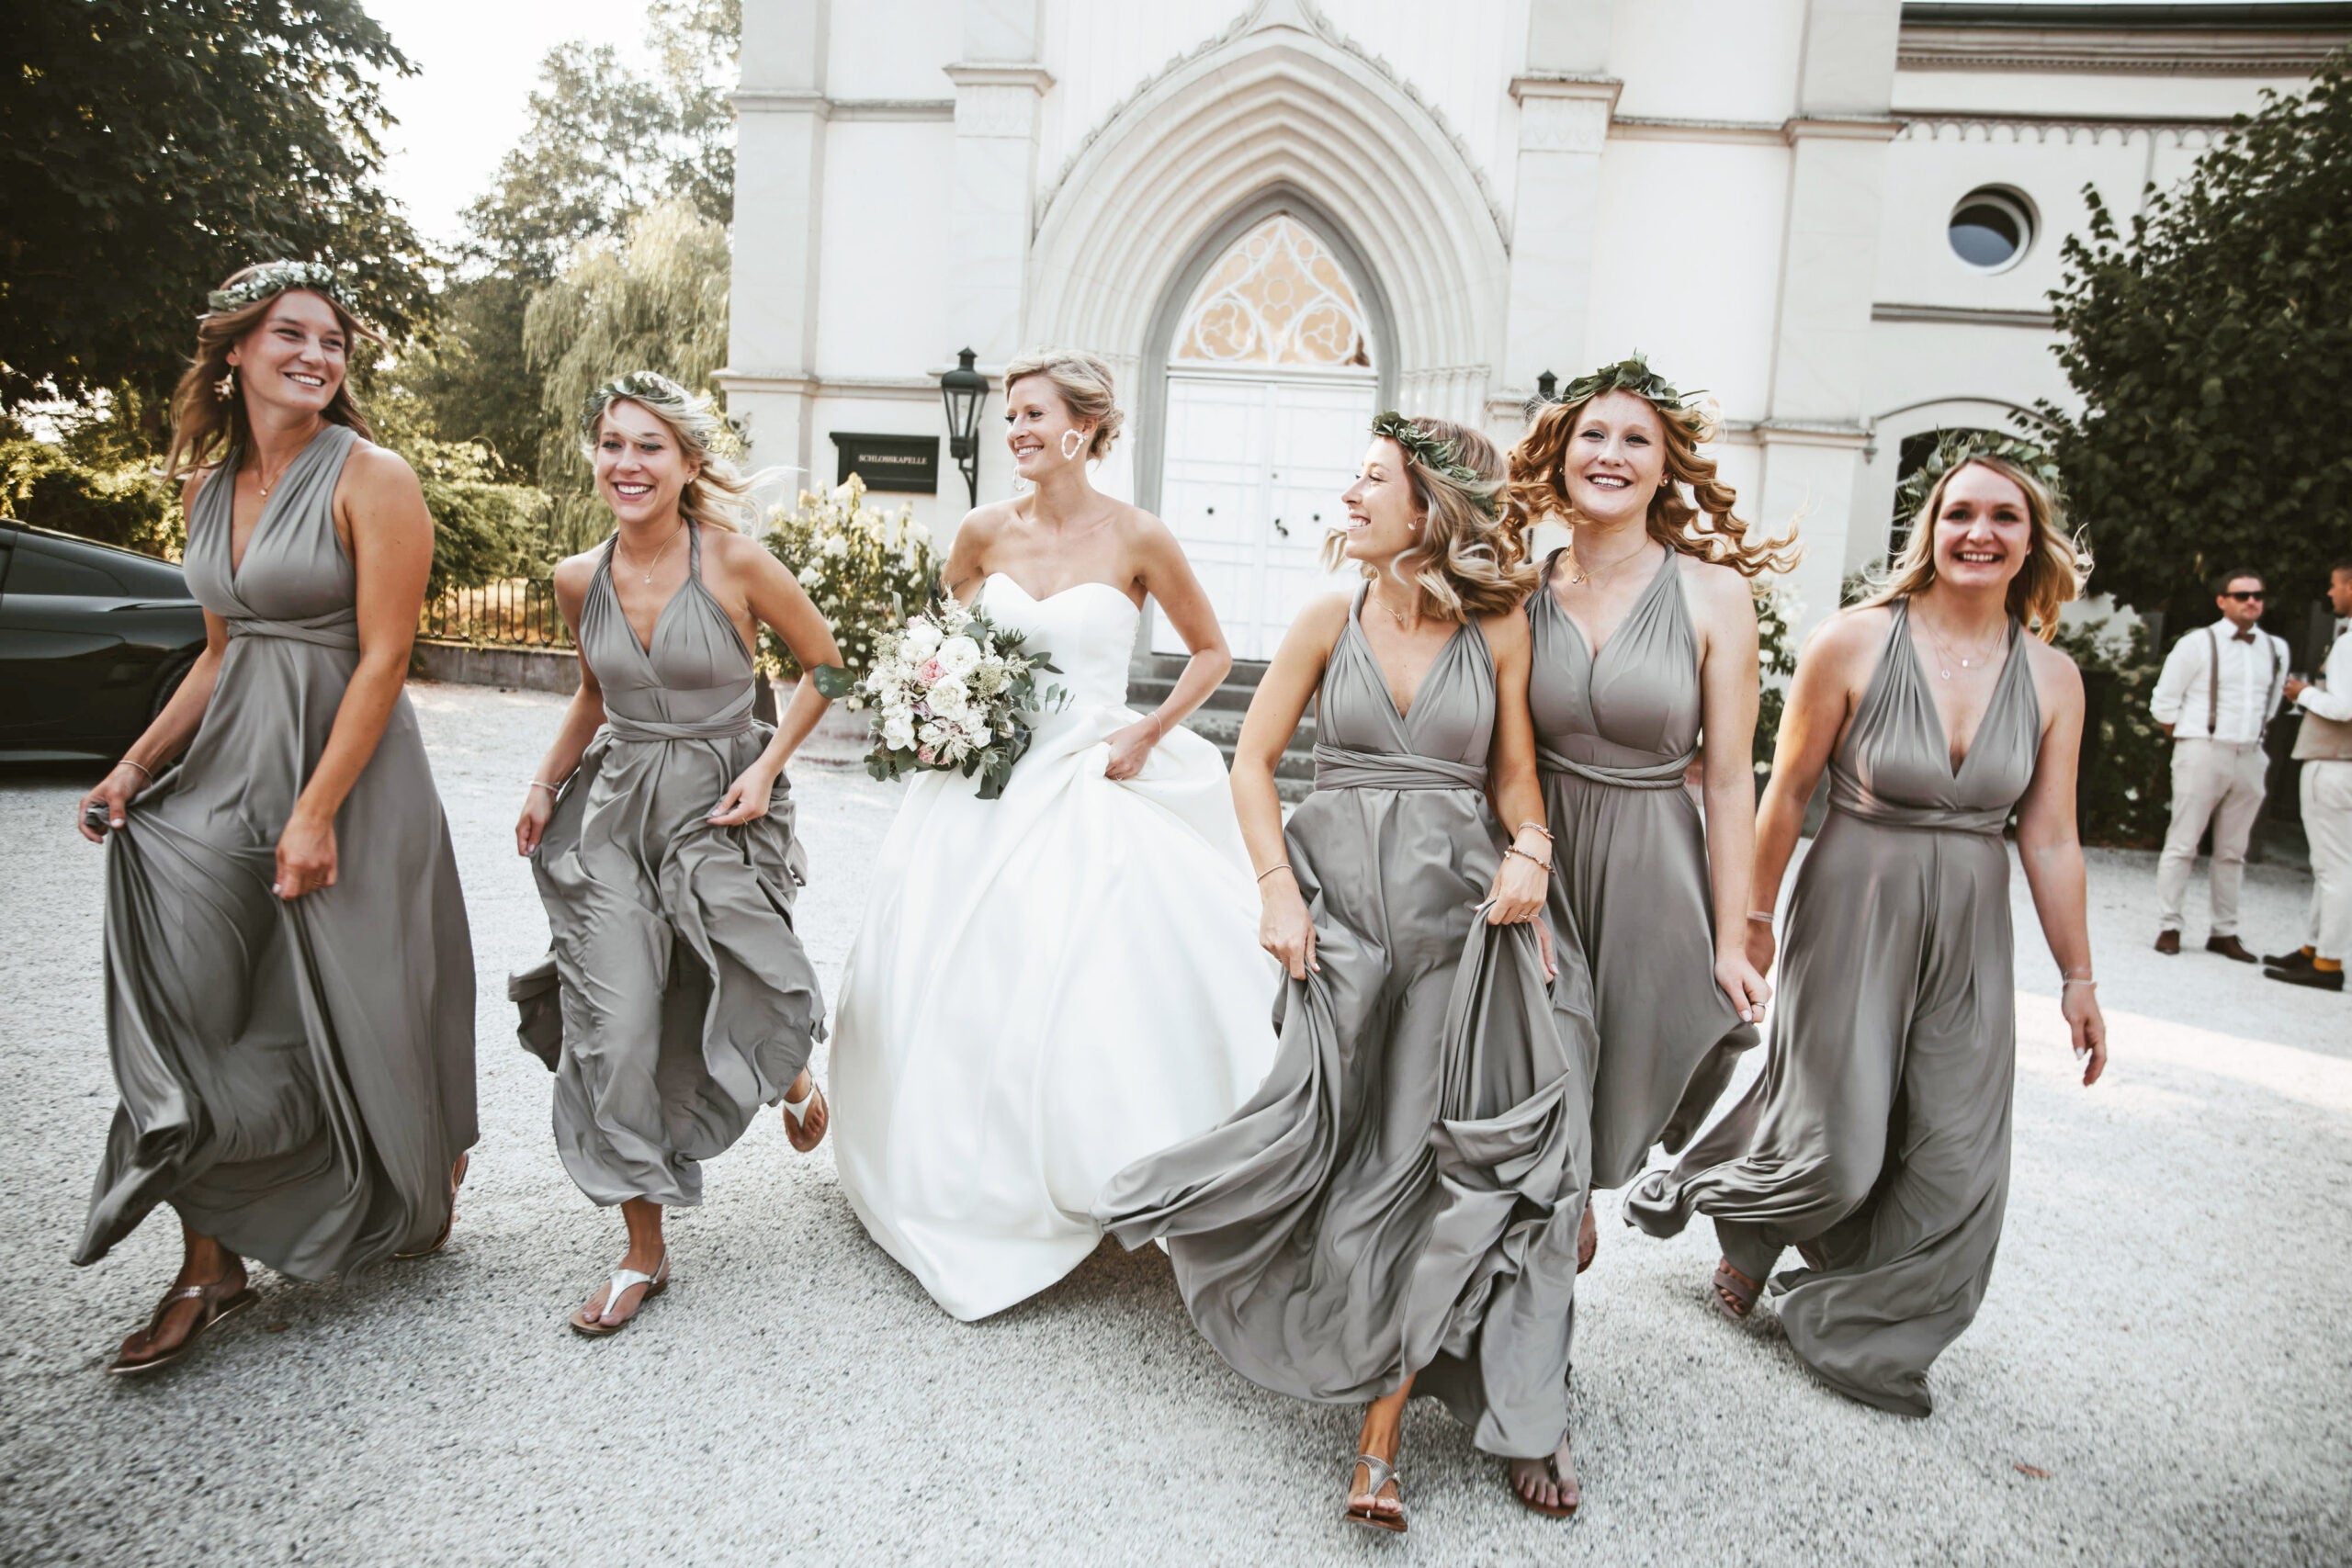 Group of happy bridesmaids